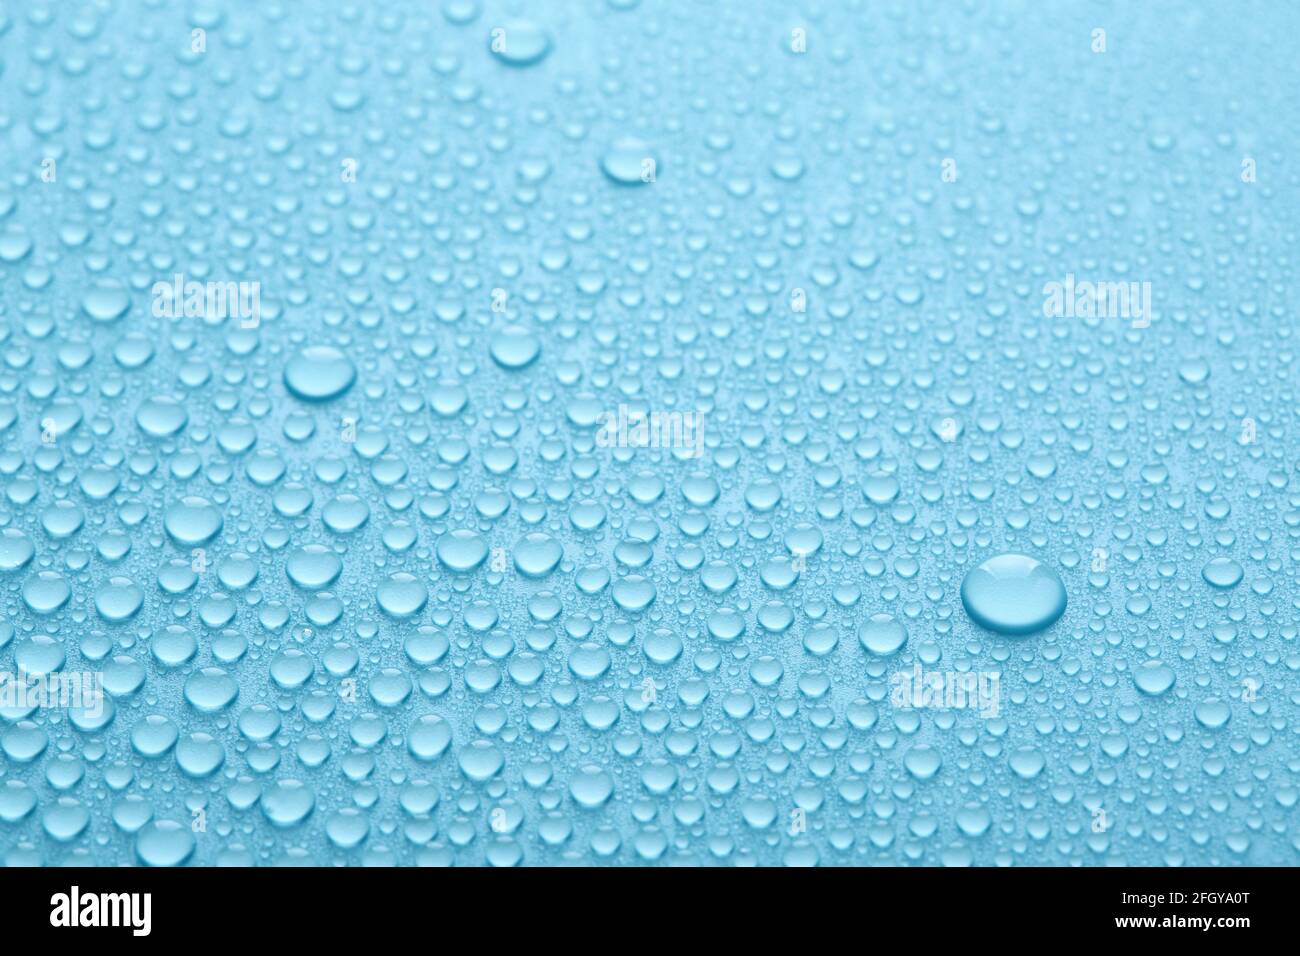 Pure water drops on blue abstract background or texture. Stock Photo